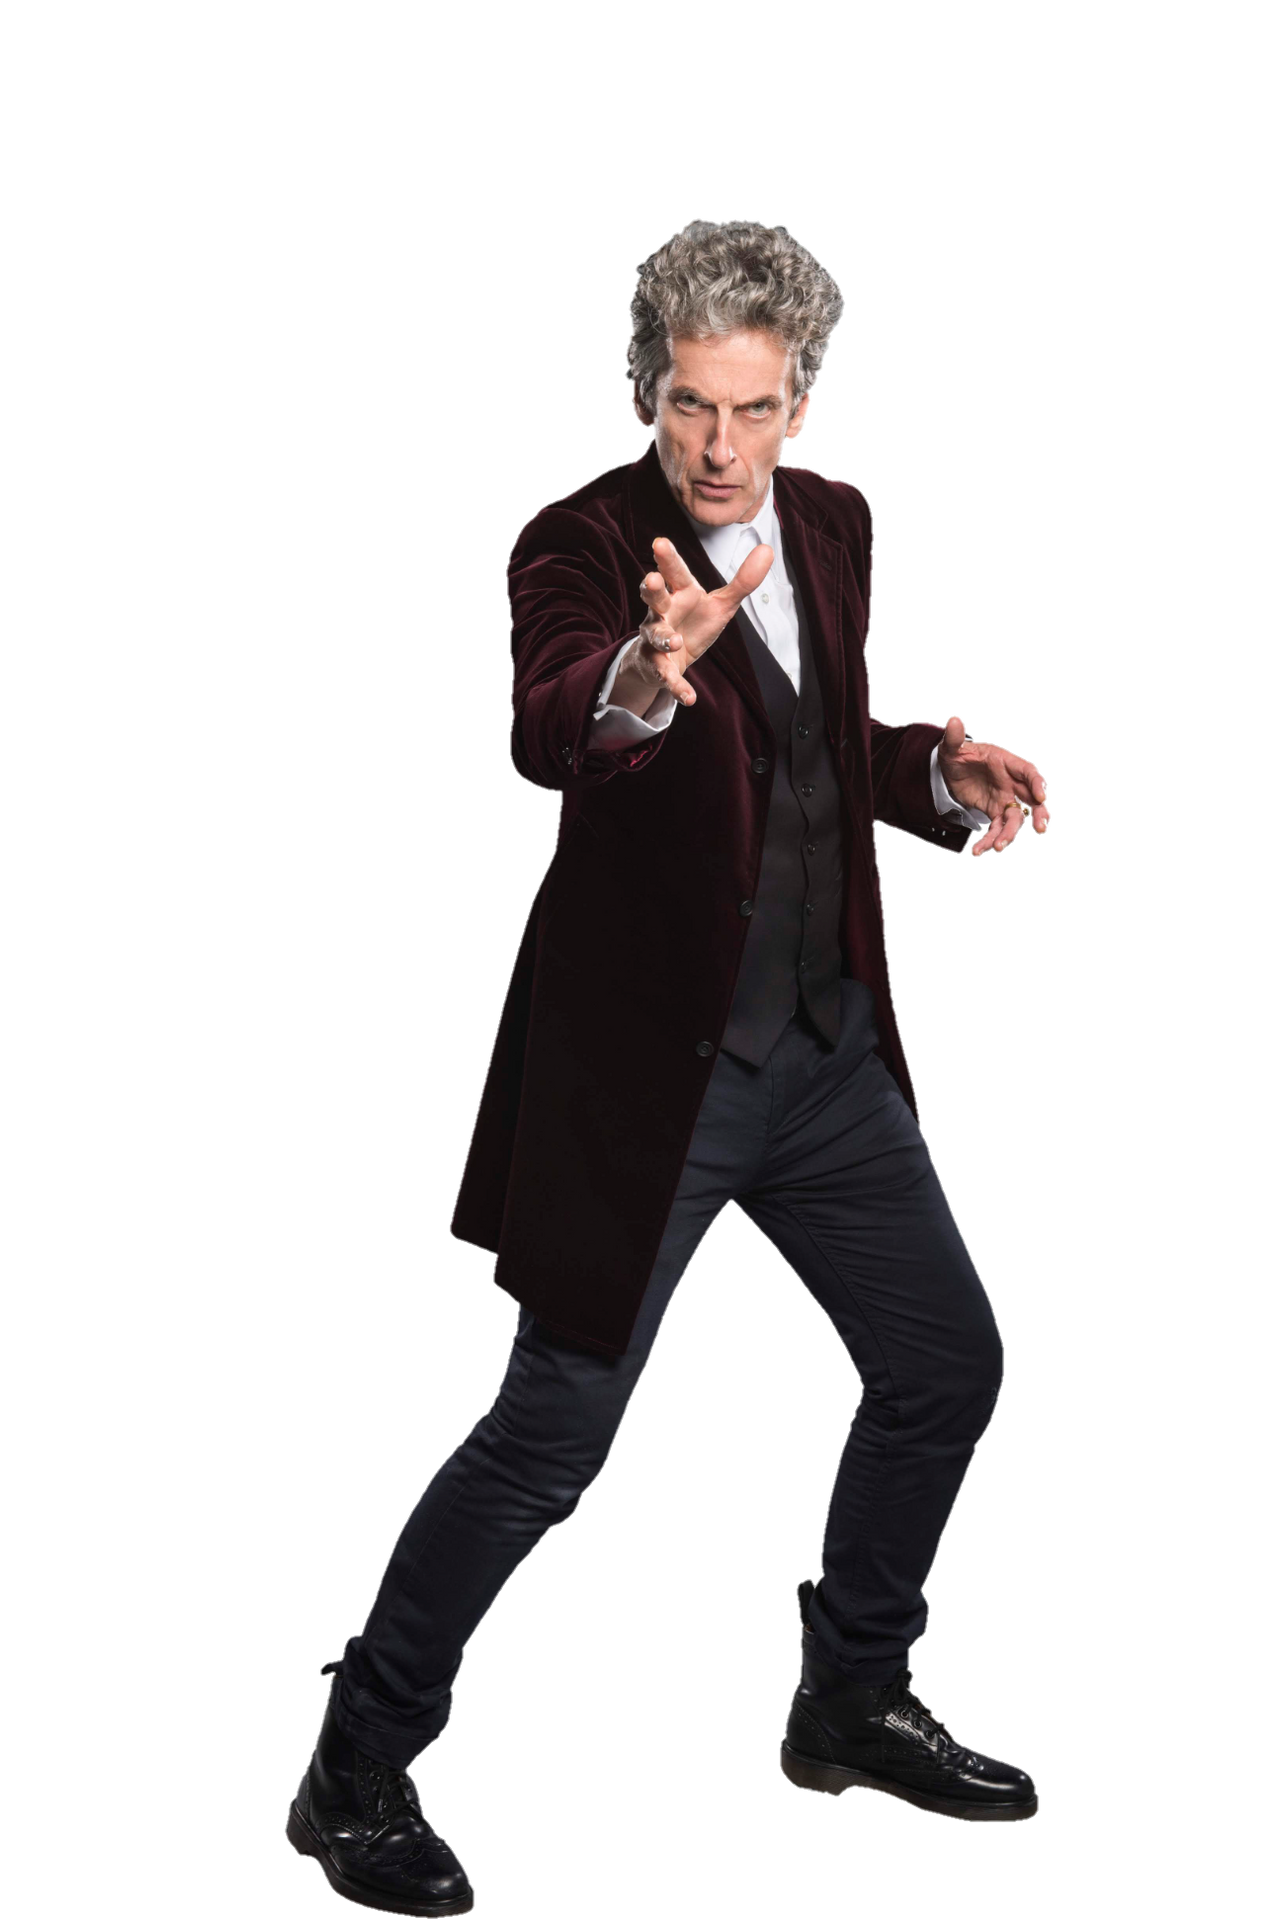 Doctor Who 12th Doctor PNG by Metropolis-Hero1125 on DeviantArt